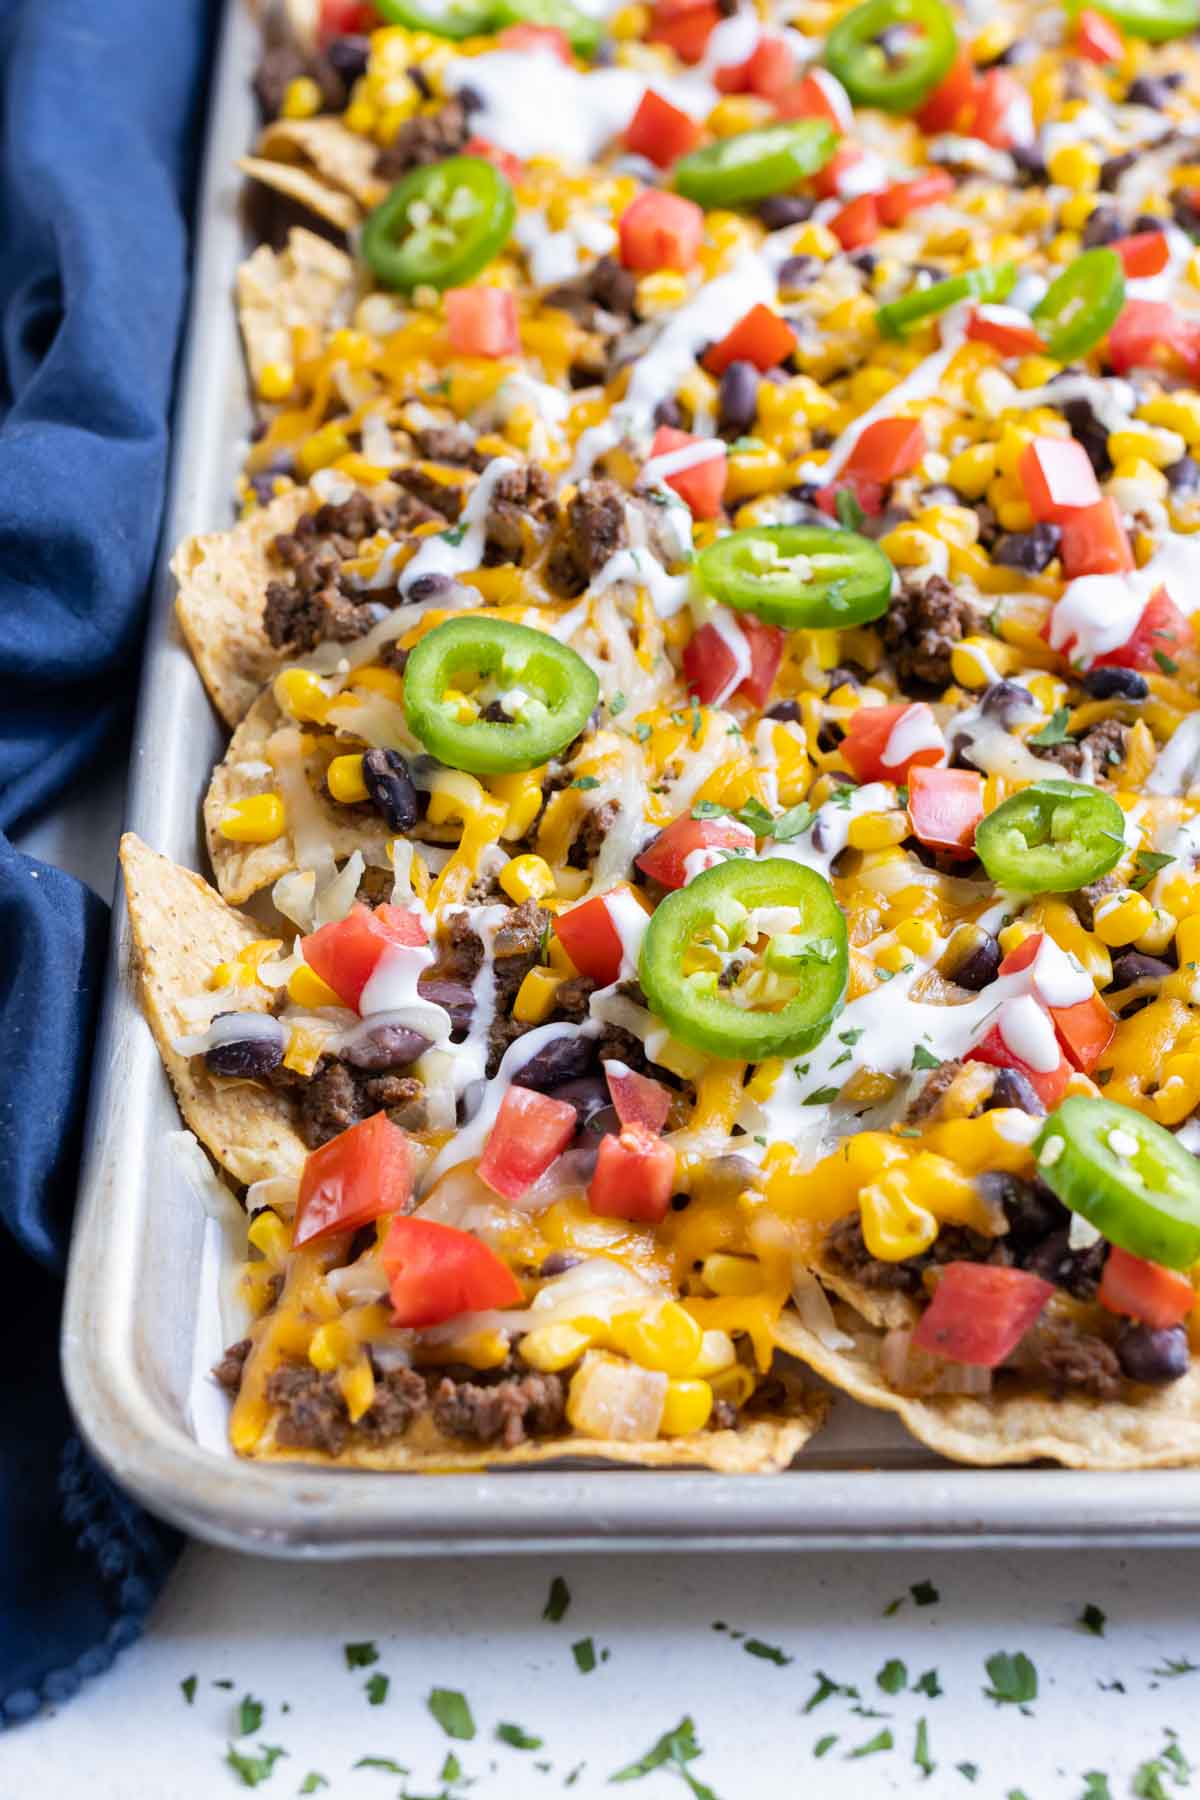 Top your nachos with your favorite toppings.